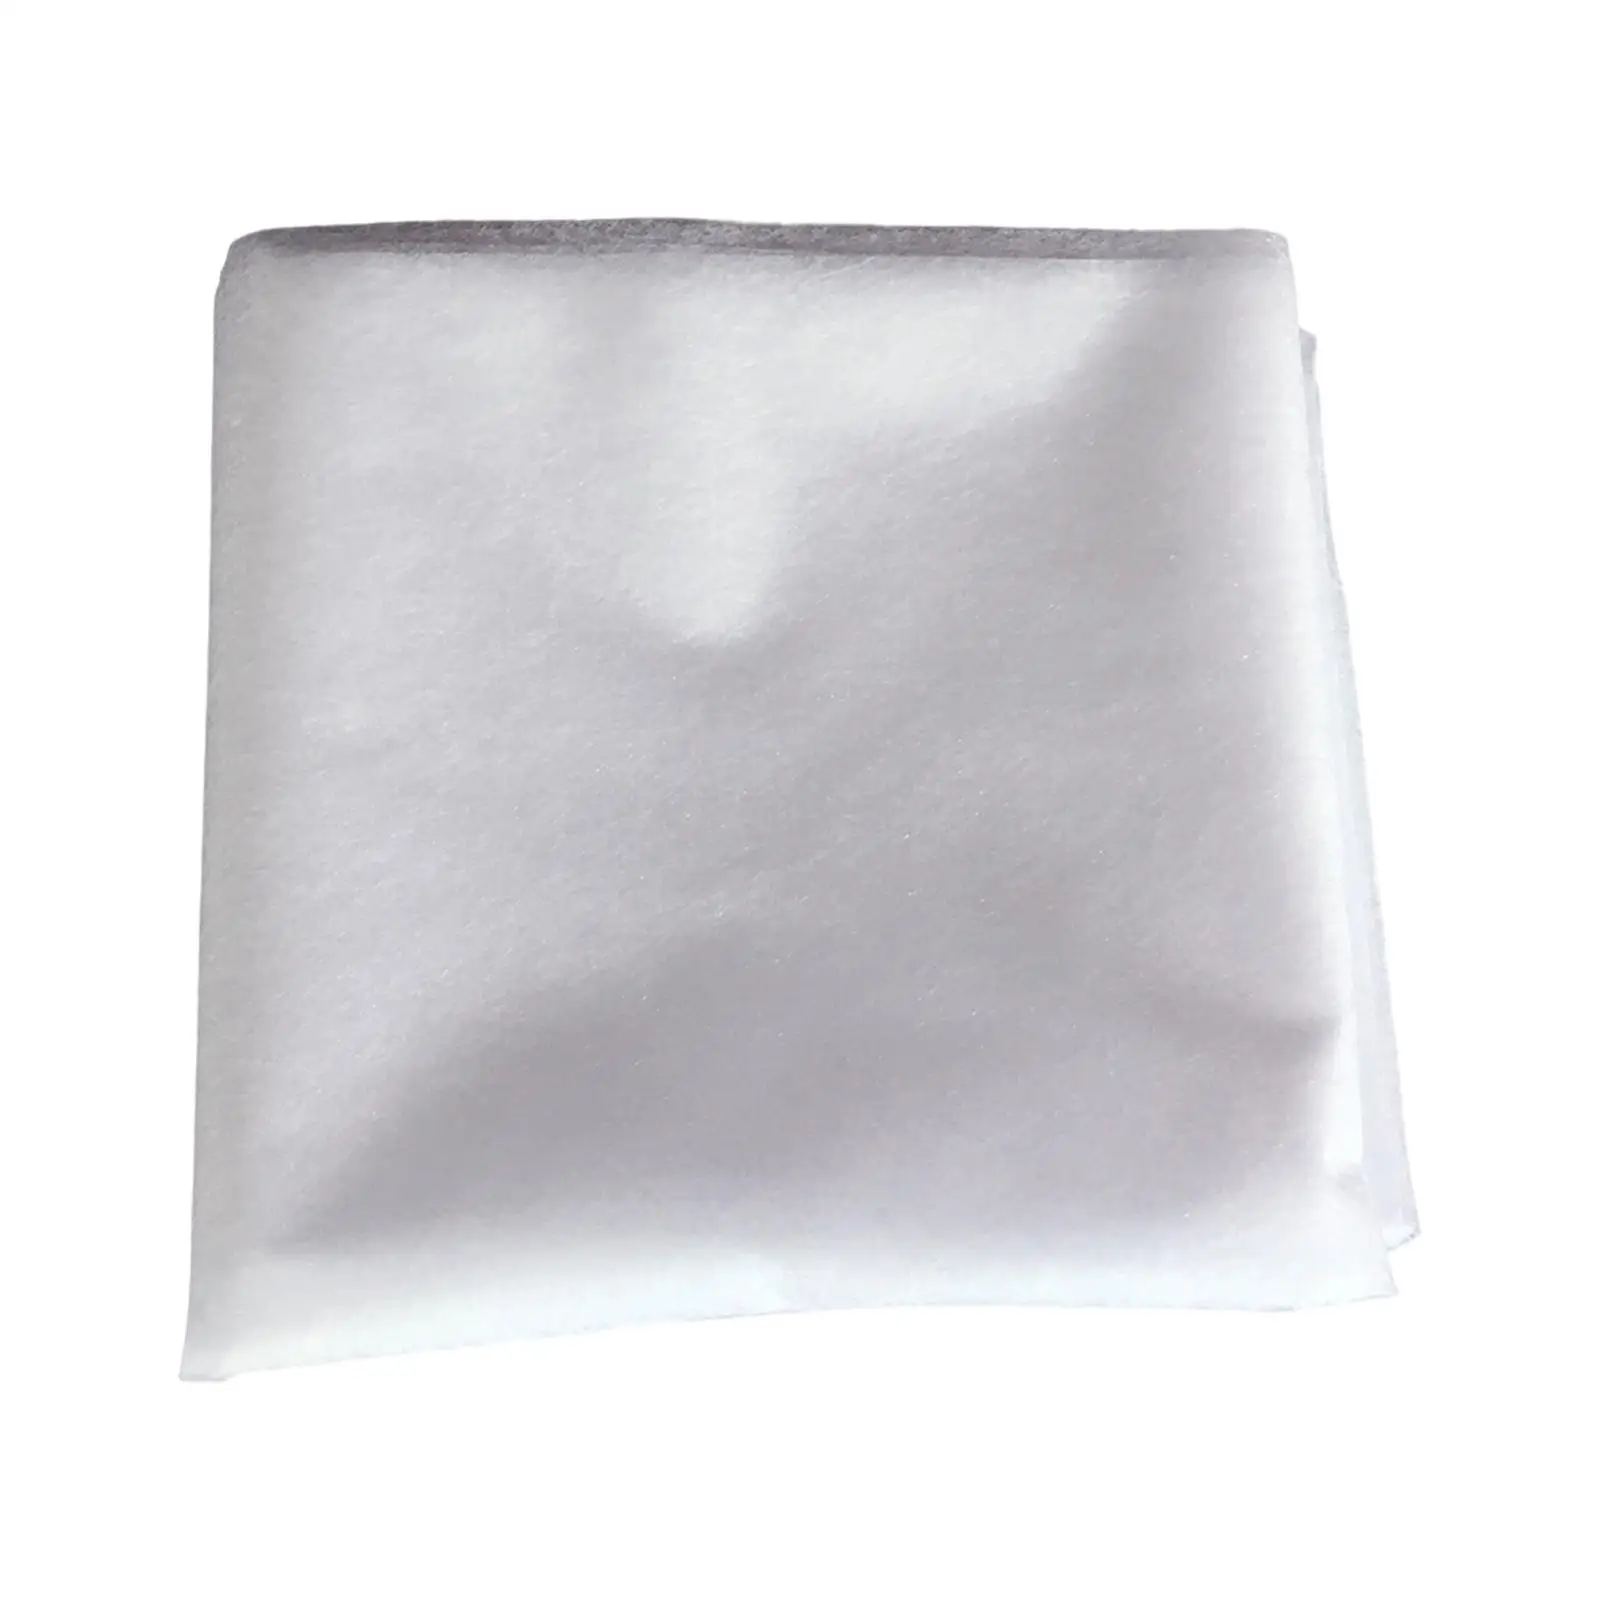 Non Woven Fusible Interfacing Sewing Craft Comfortable to Touch Bonding Fabric Applique for Purse Garments Handbags Broadcloth